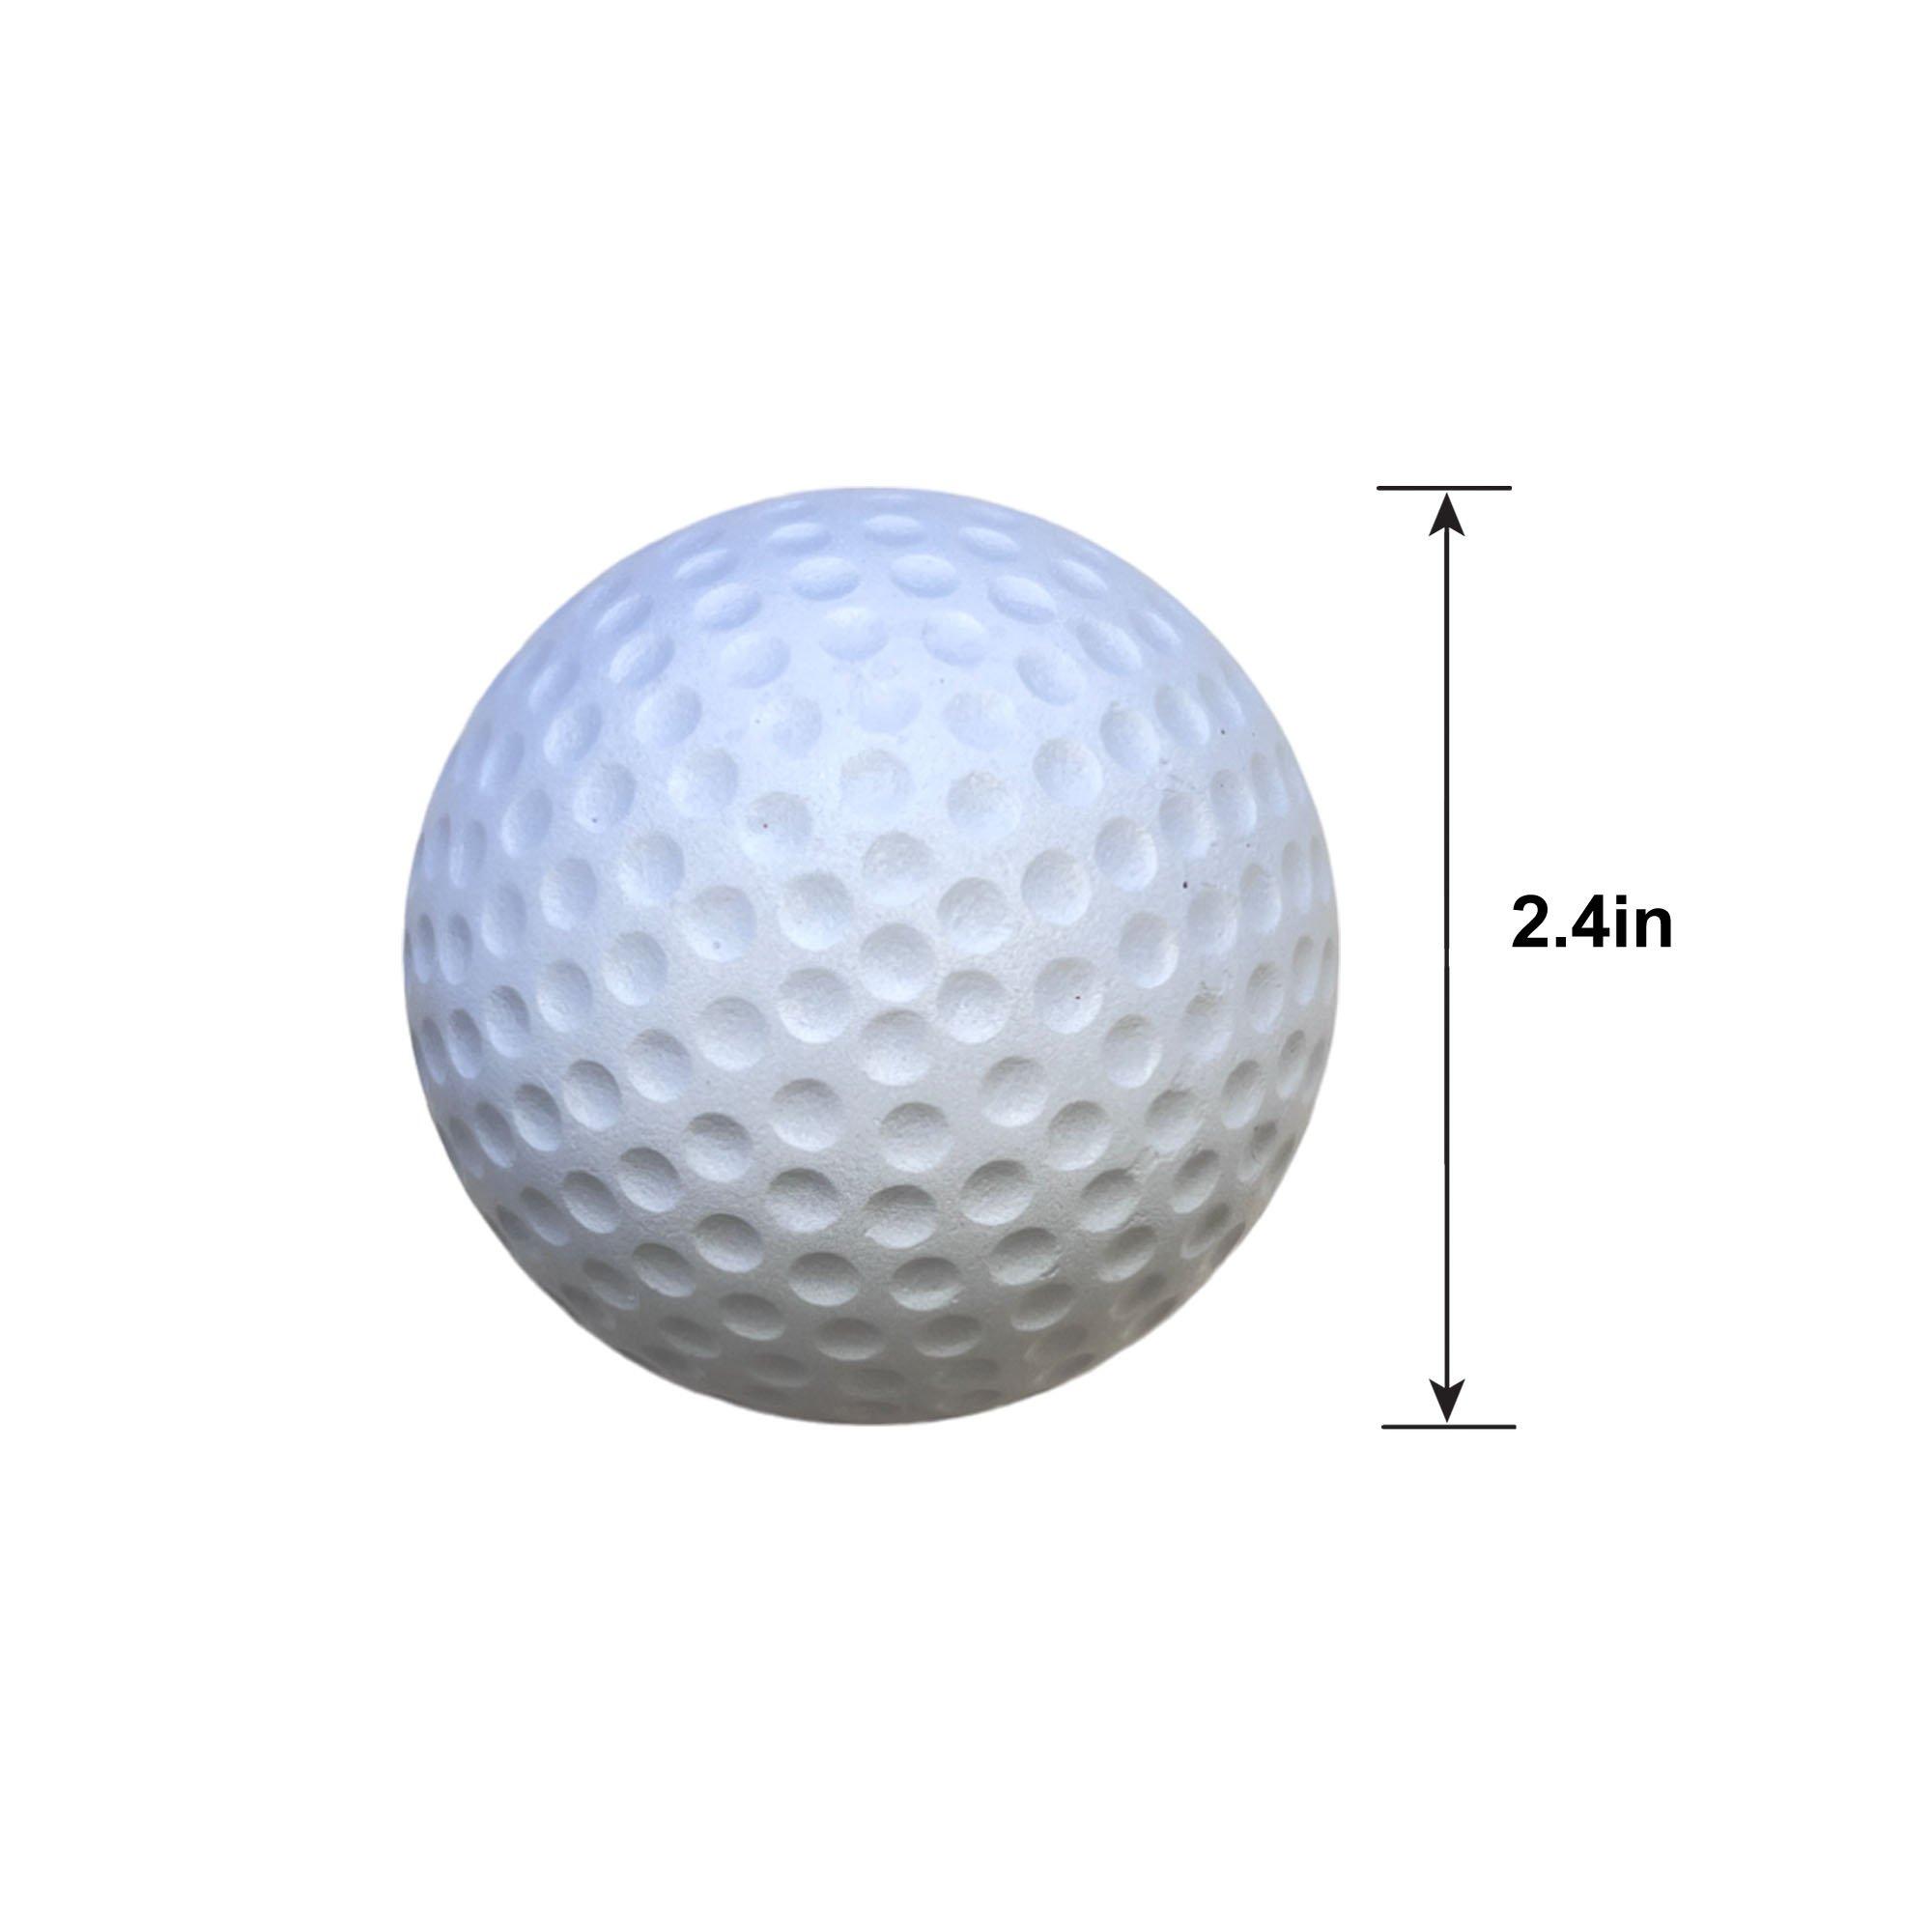 Squeeze Stress Relief Golf Balls, 6pc